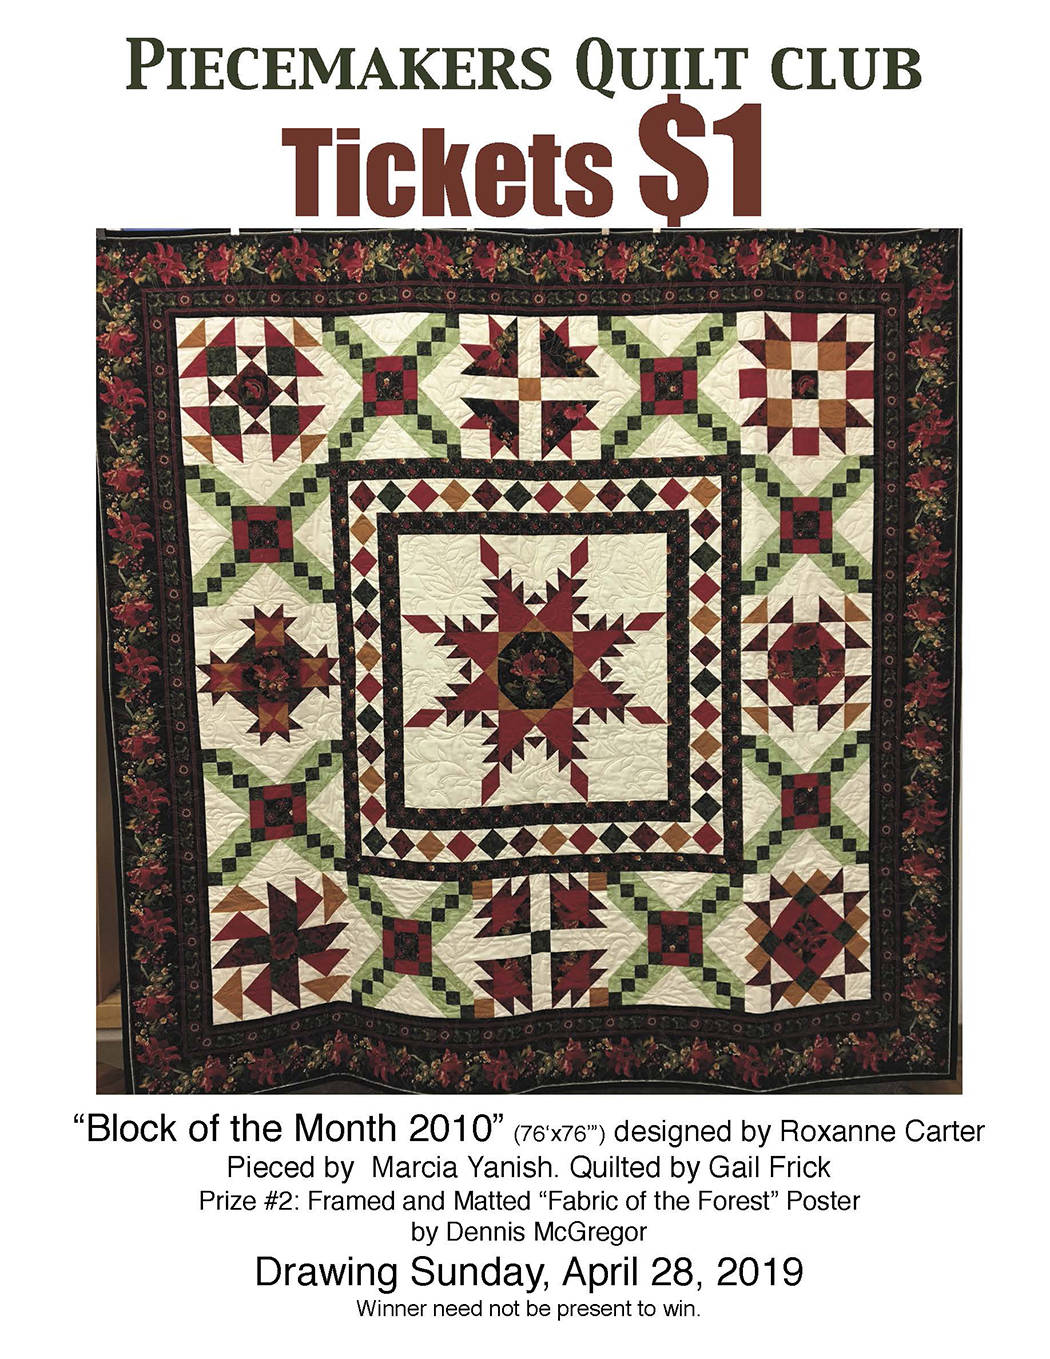 Enjoy Fabric of the Forest Quilt Show at Forks’ Rainfest Celebration in April